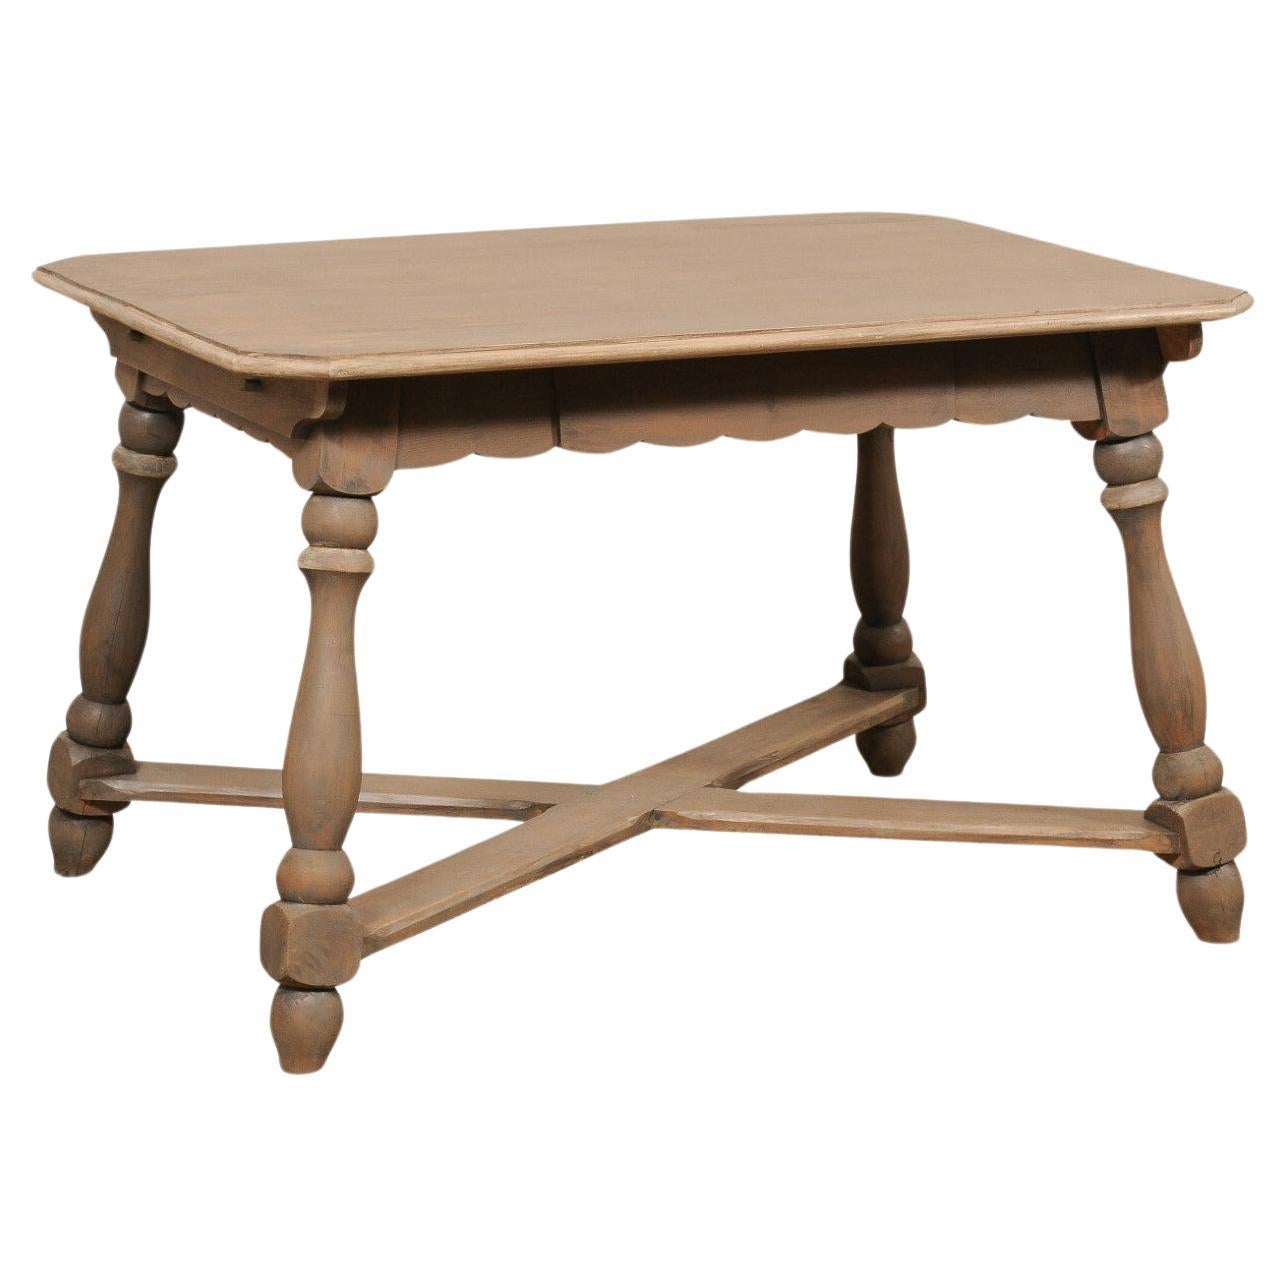 European Wooden Table w/Scalloped Apron, Nicely Turned Legs & X-Stretcher For Sale